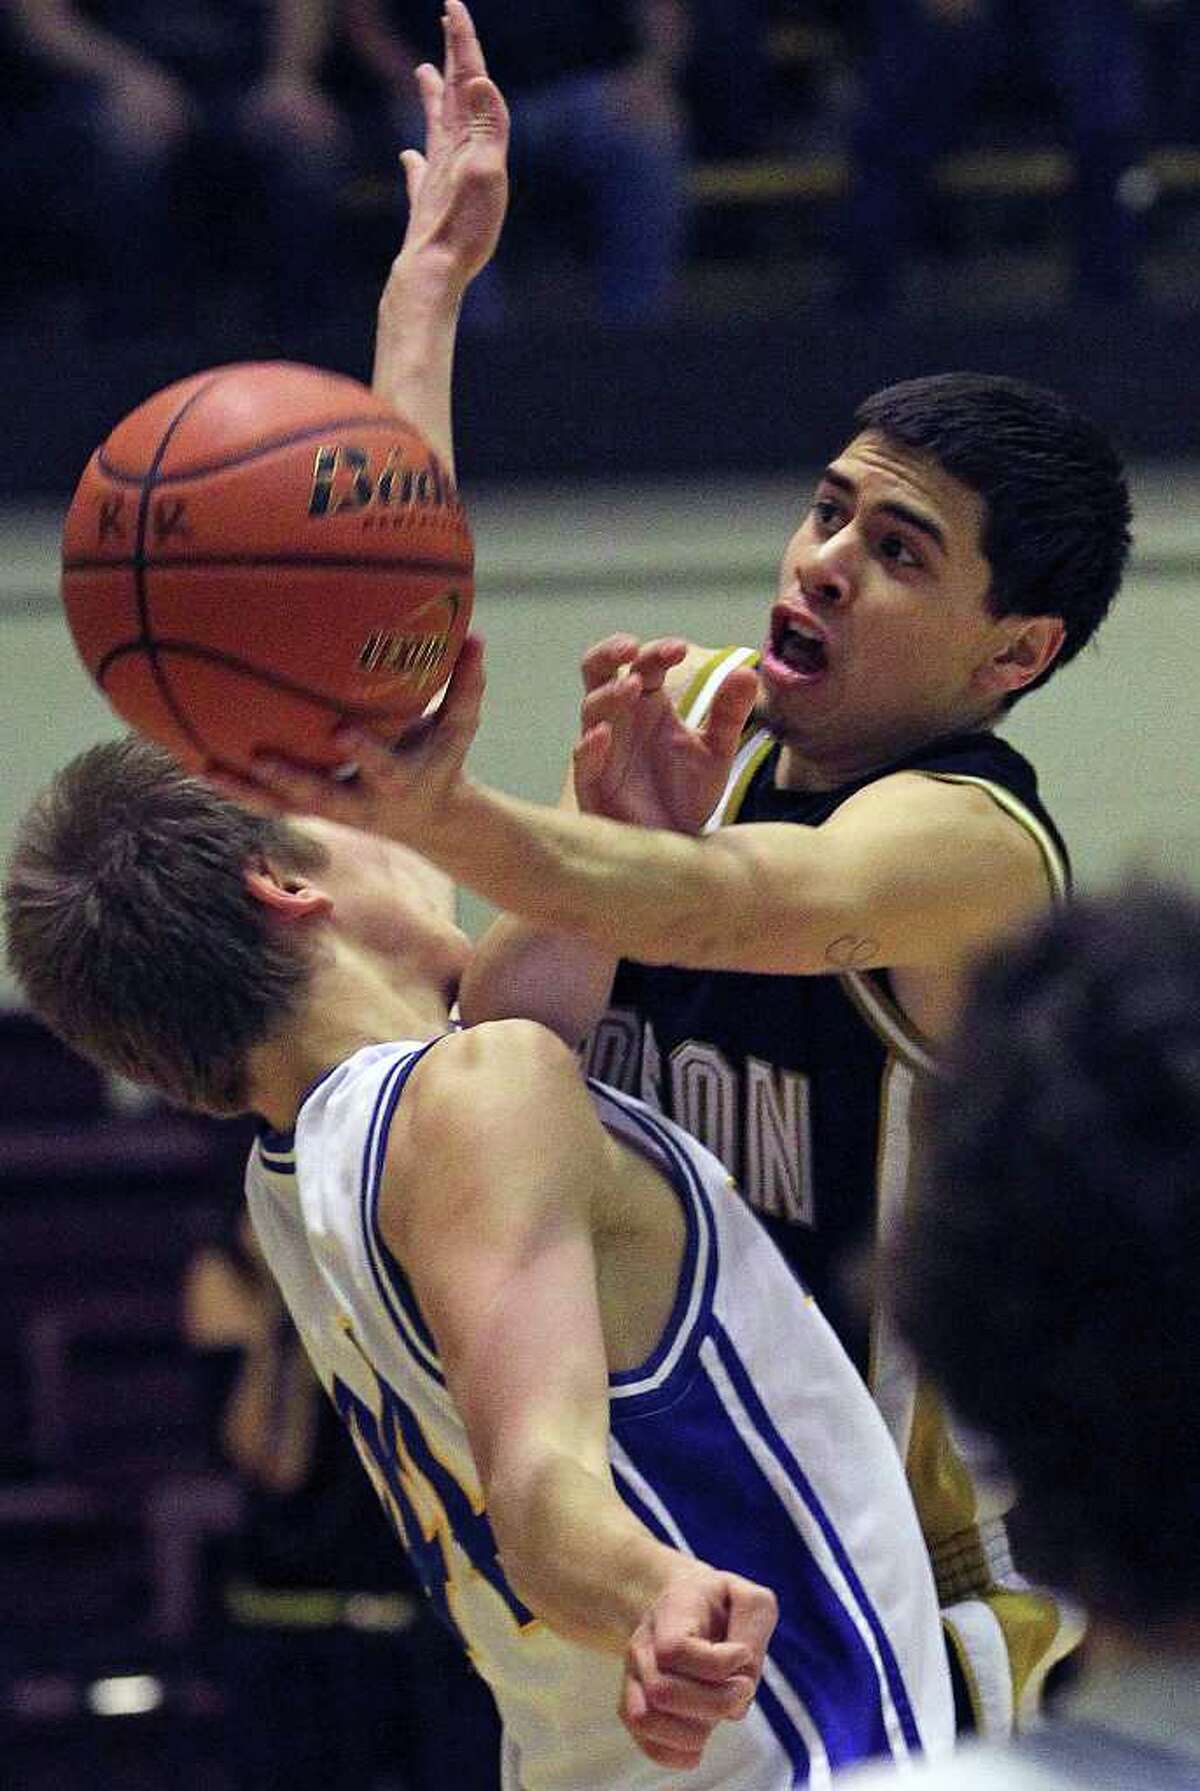 Edison guard Marco Guerrero takes on post Ben Lammers for a shot in the second half as Alamo Heights beats Edison 50-39 in Region IV 4A finals at Littleton Gym on March 3, 2012 Tom Reel/ San Antonio Express-News